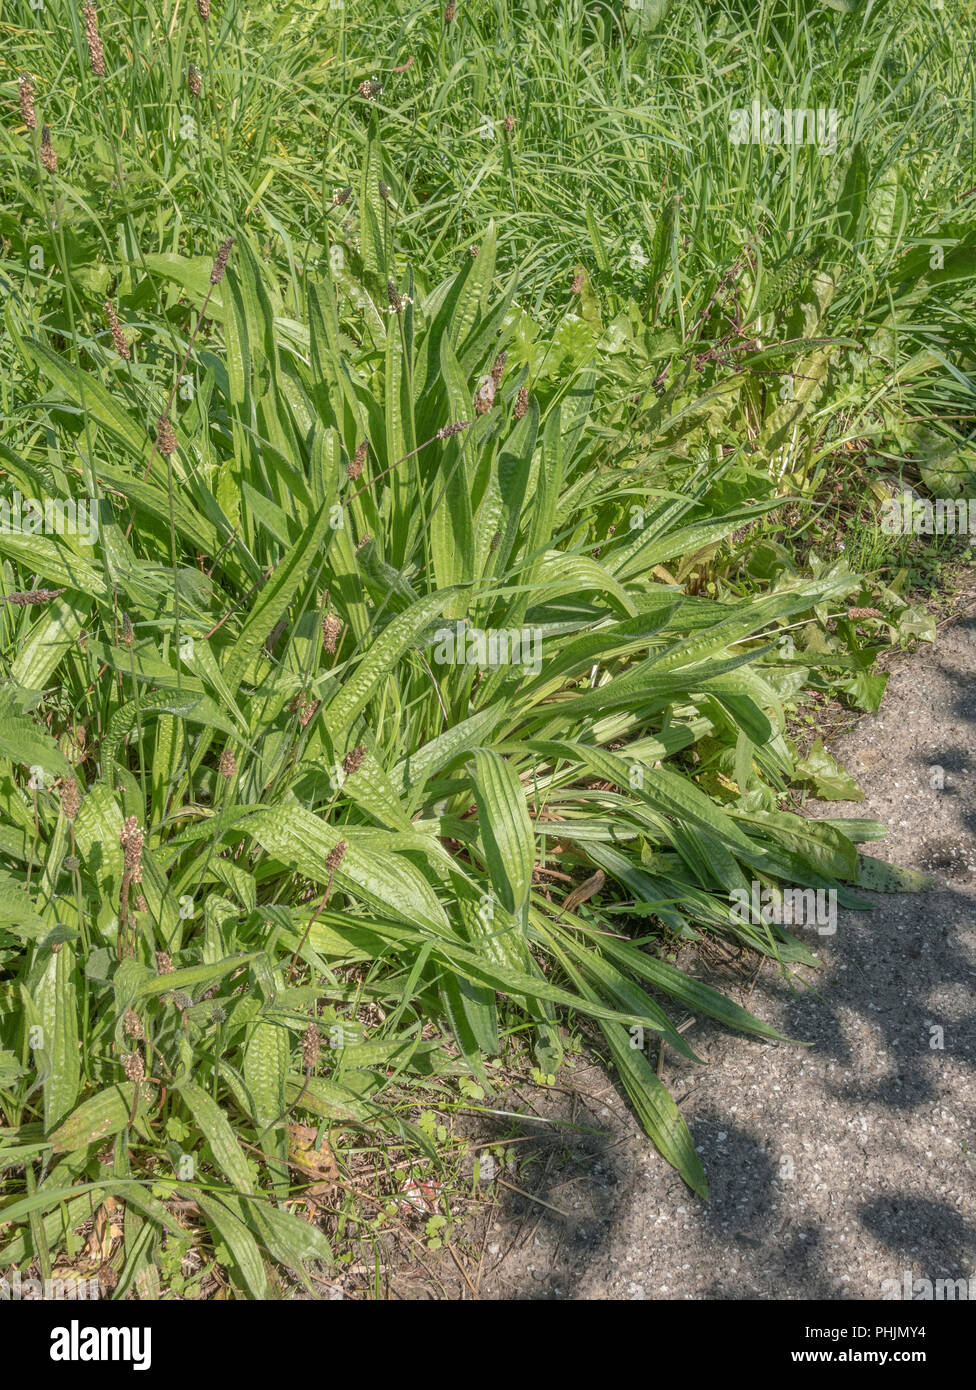 Leaves / foliage of the common weed Ribwort Plantain / Plantago lanceolata which can be used as a foraged food once cooked (more of a survivial food) Stock Photo